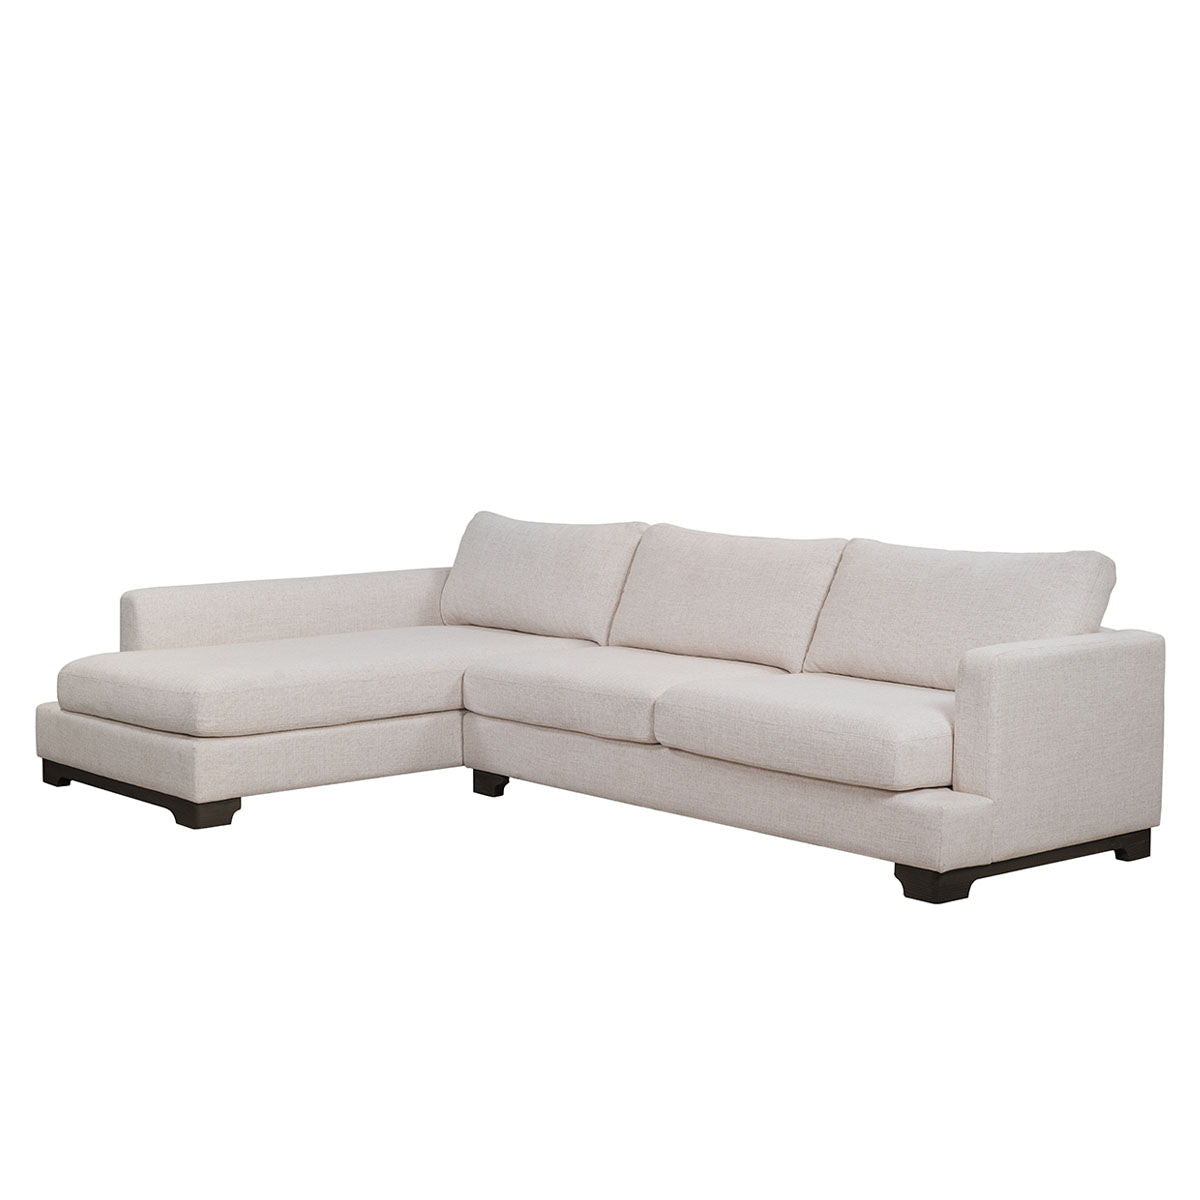 Brea - Sectional With LAF Chaise - Beige